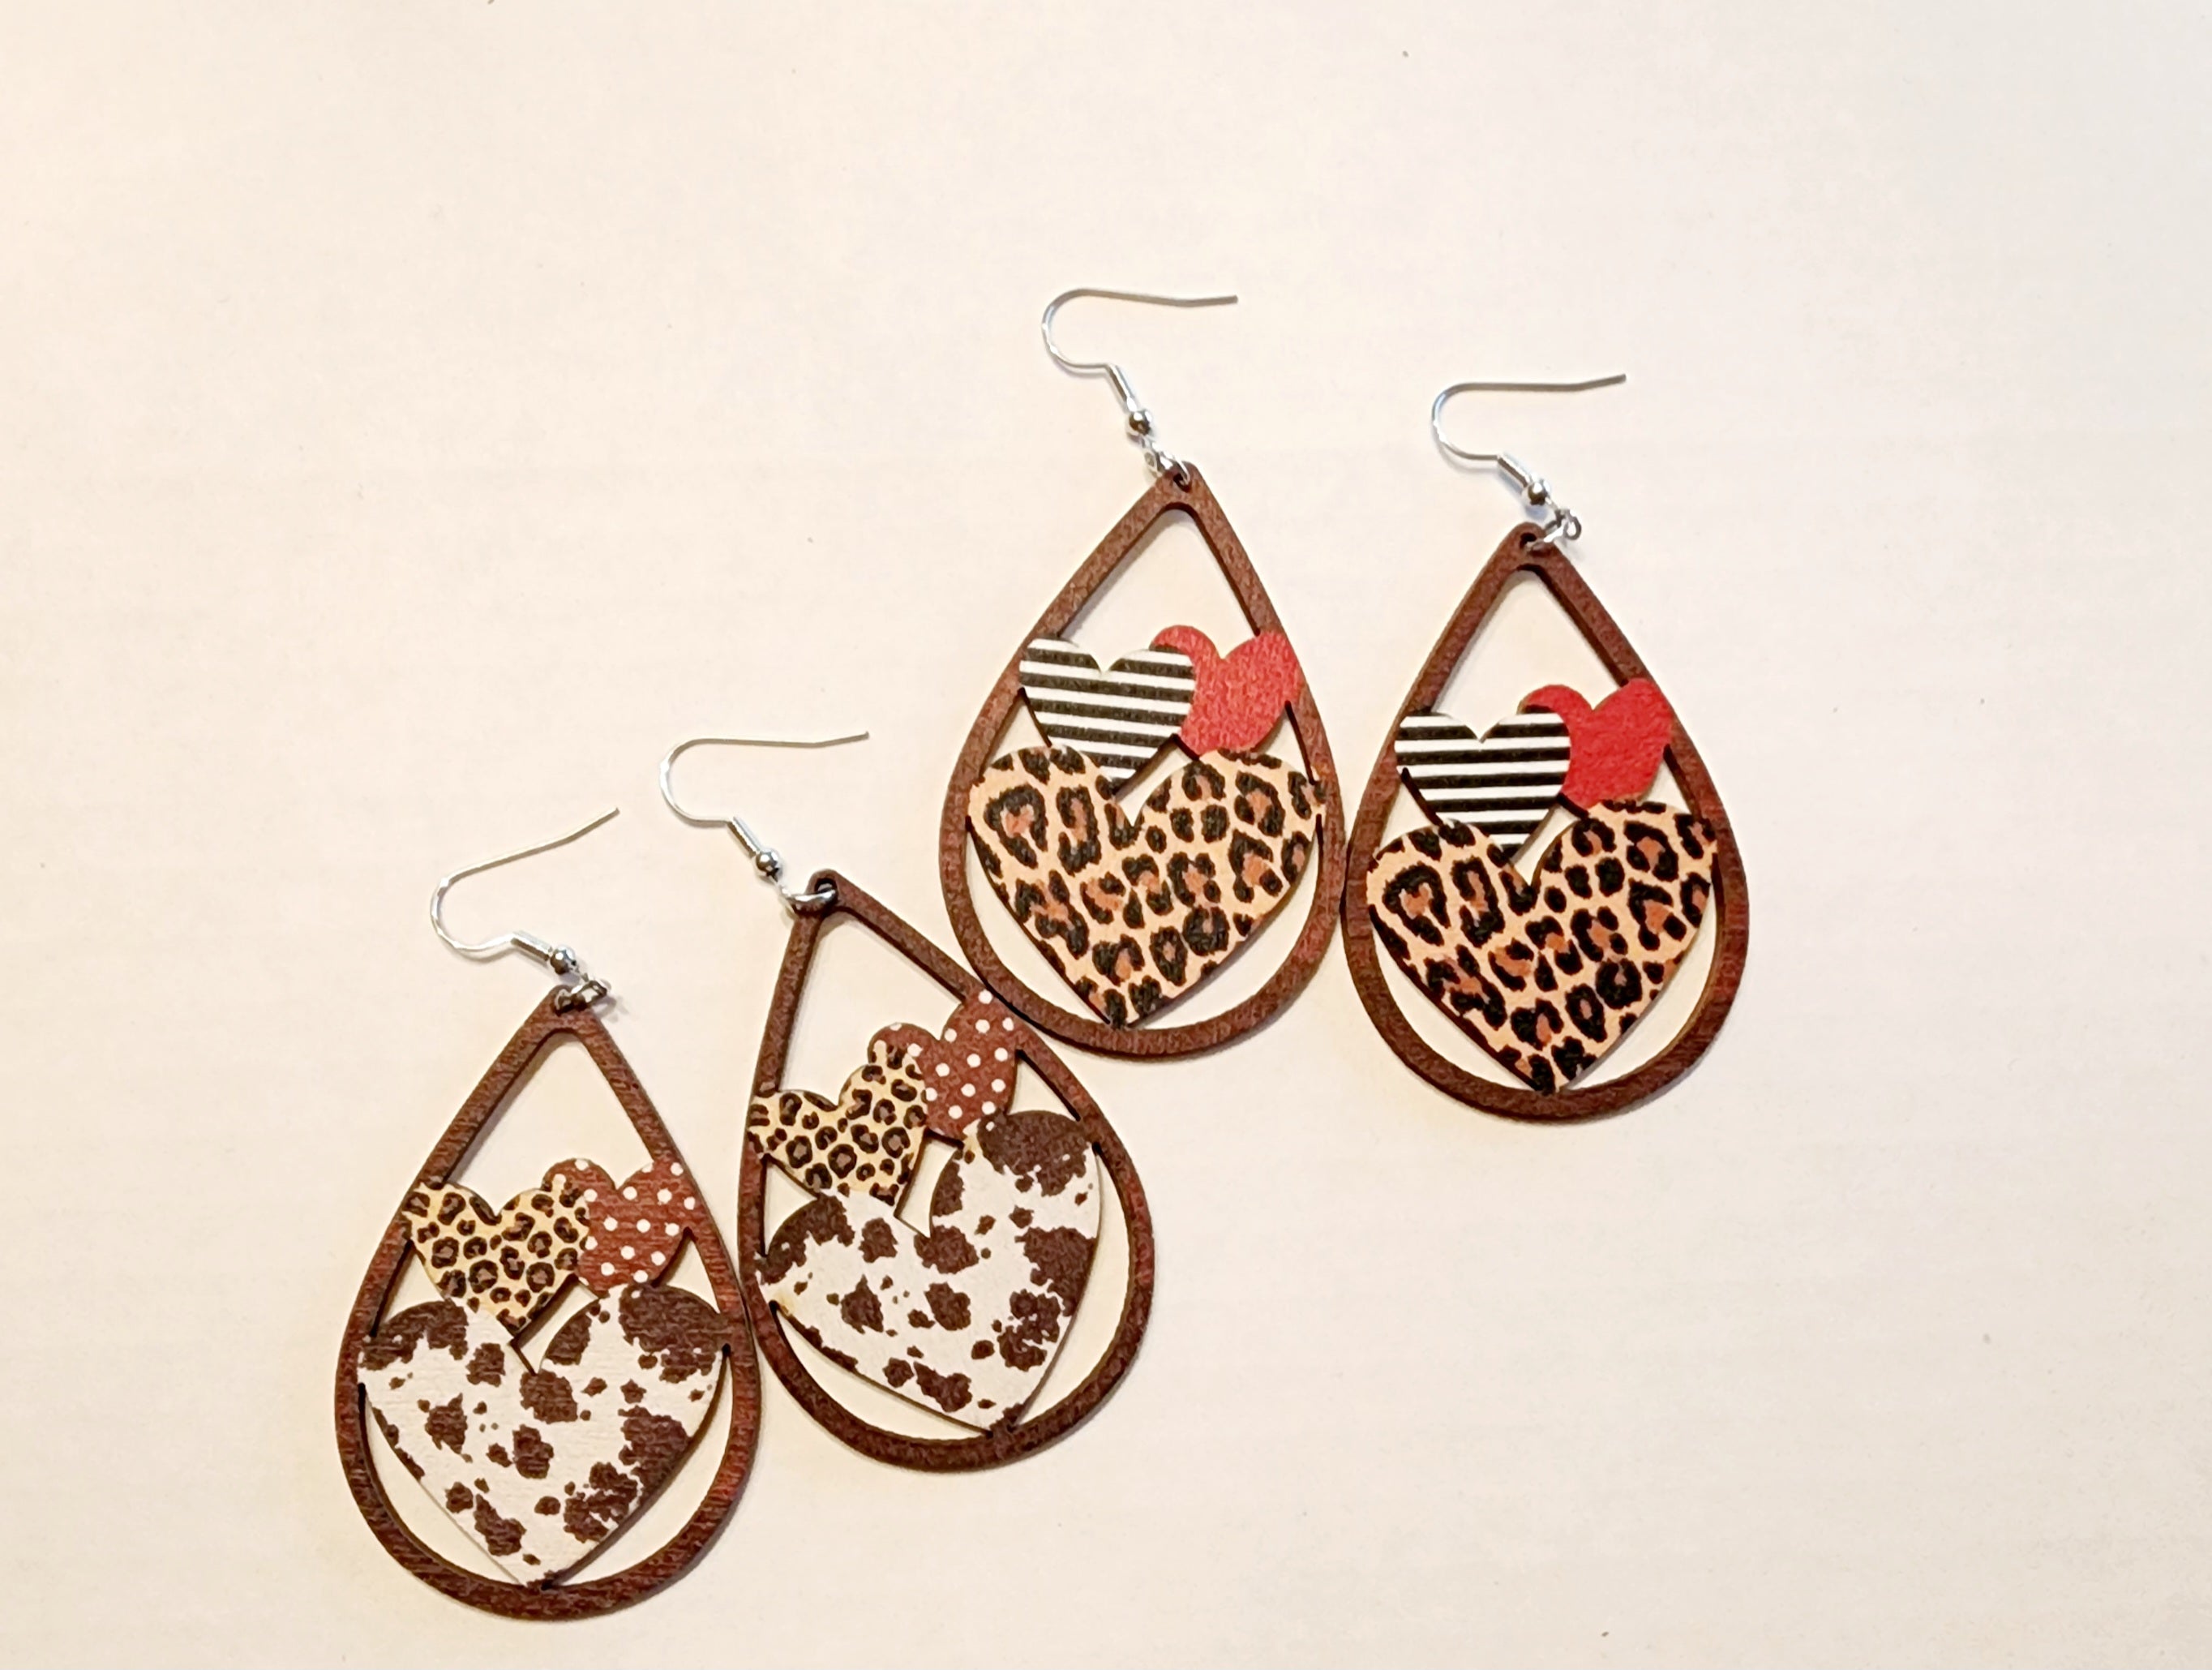 Frehsky Earrings for Women Valentine's Day Red Love Drop Earrings Double Sided Wooden Earrings to Wear Decorative Girls Gifts Valentines Day Gifts